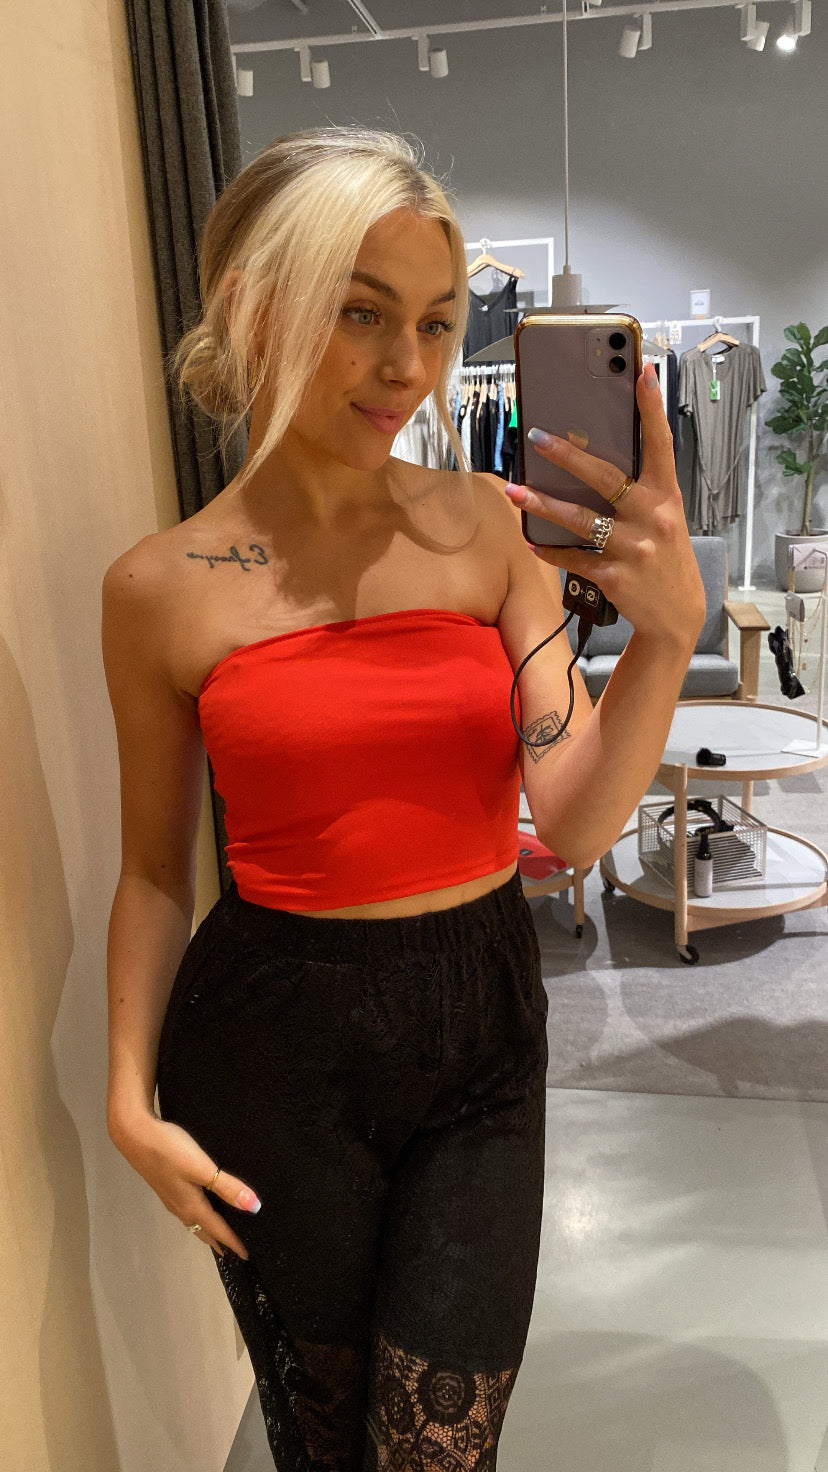 PCMINNI Tube Top - High Risk Red